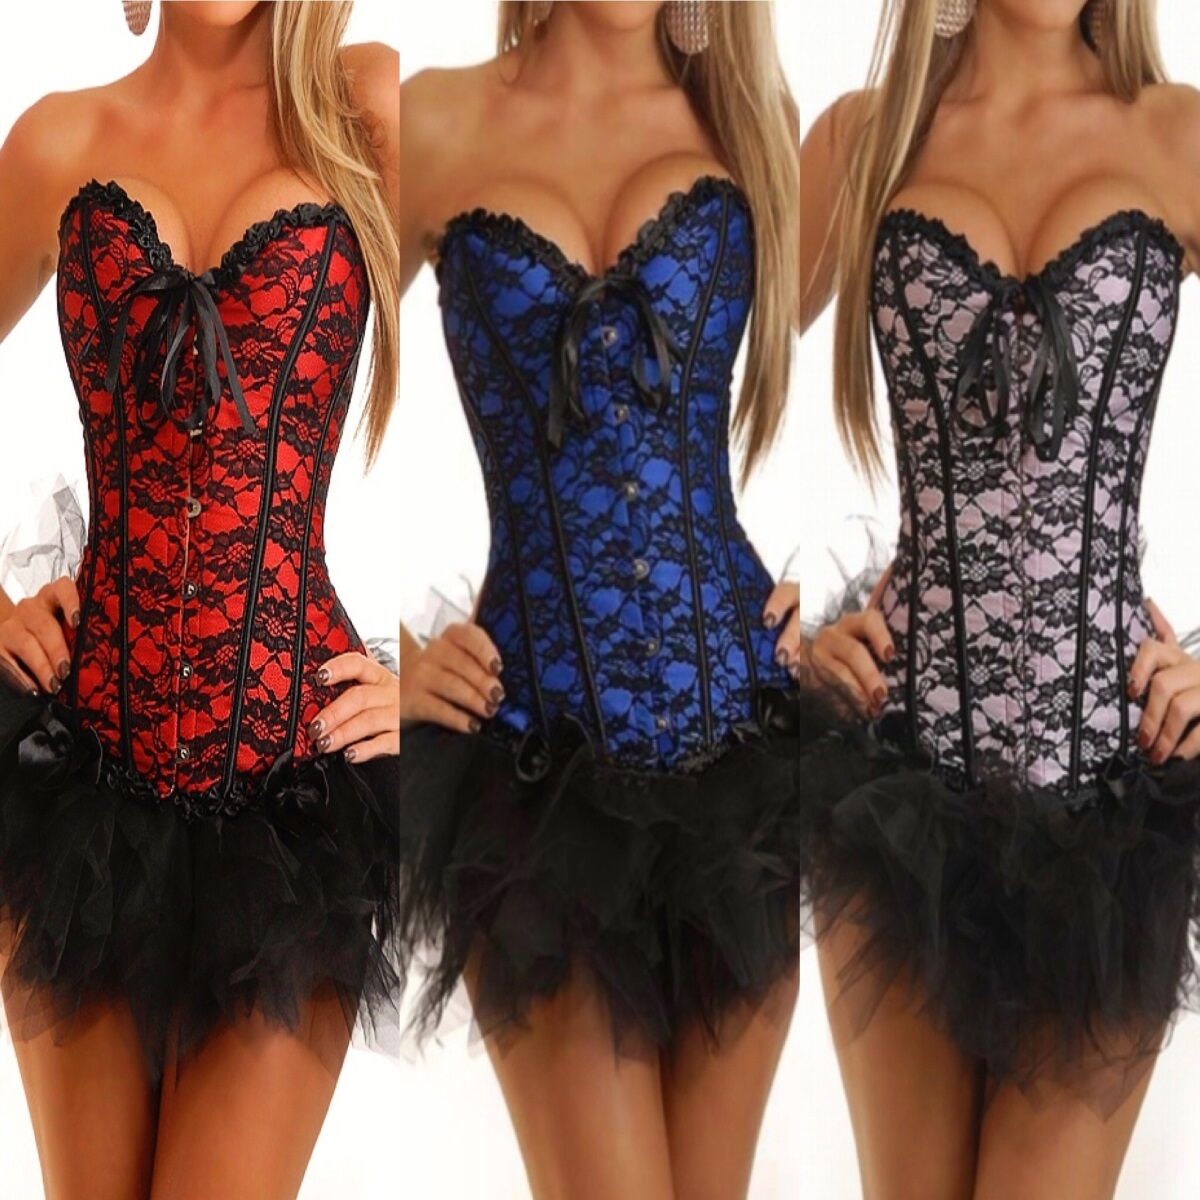 Sexy Lingerie Costume Lace overlay Pettiski Max 63% OFF + Oklahoma City Mall Top Corset Bustier